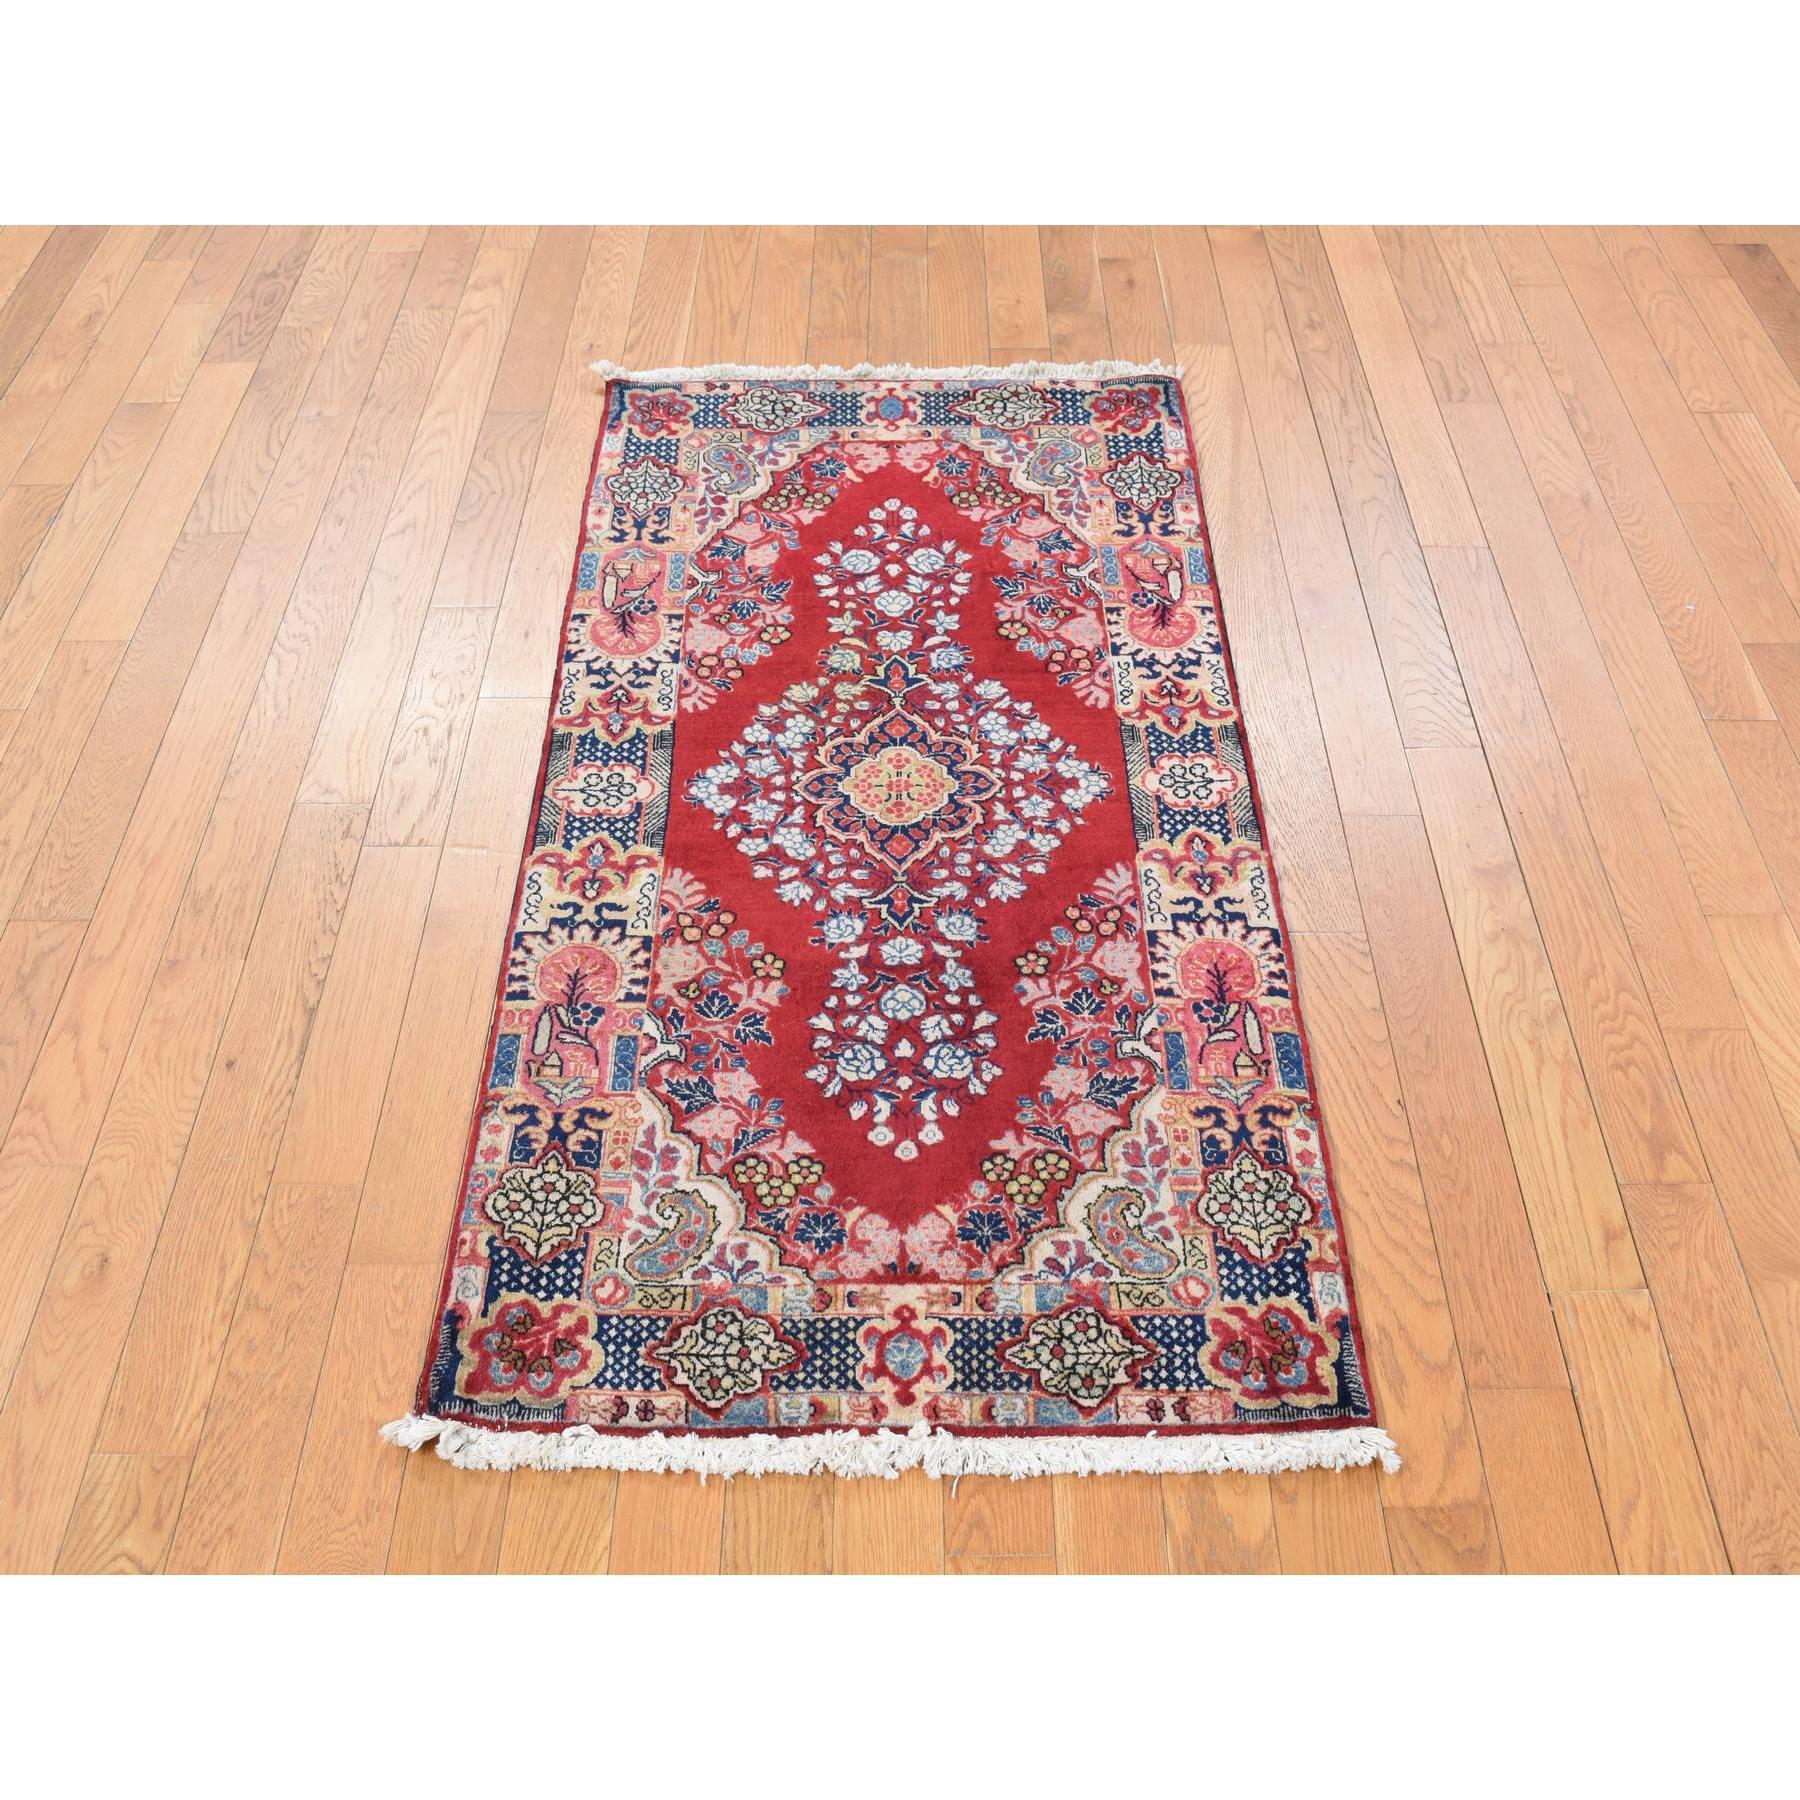 Medieval Red Antique Persian Sarouk Full Pile Clean and Soft Hand Knotted Rug 2'6